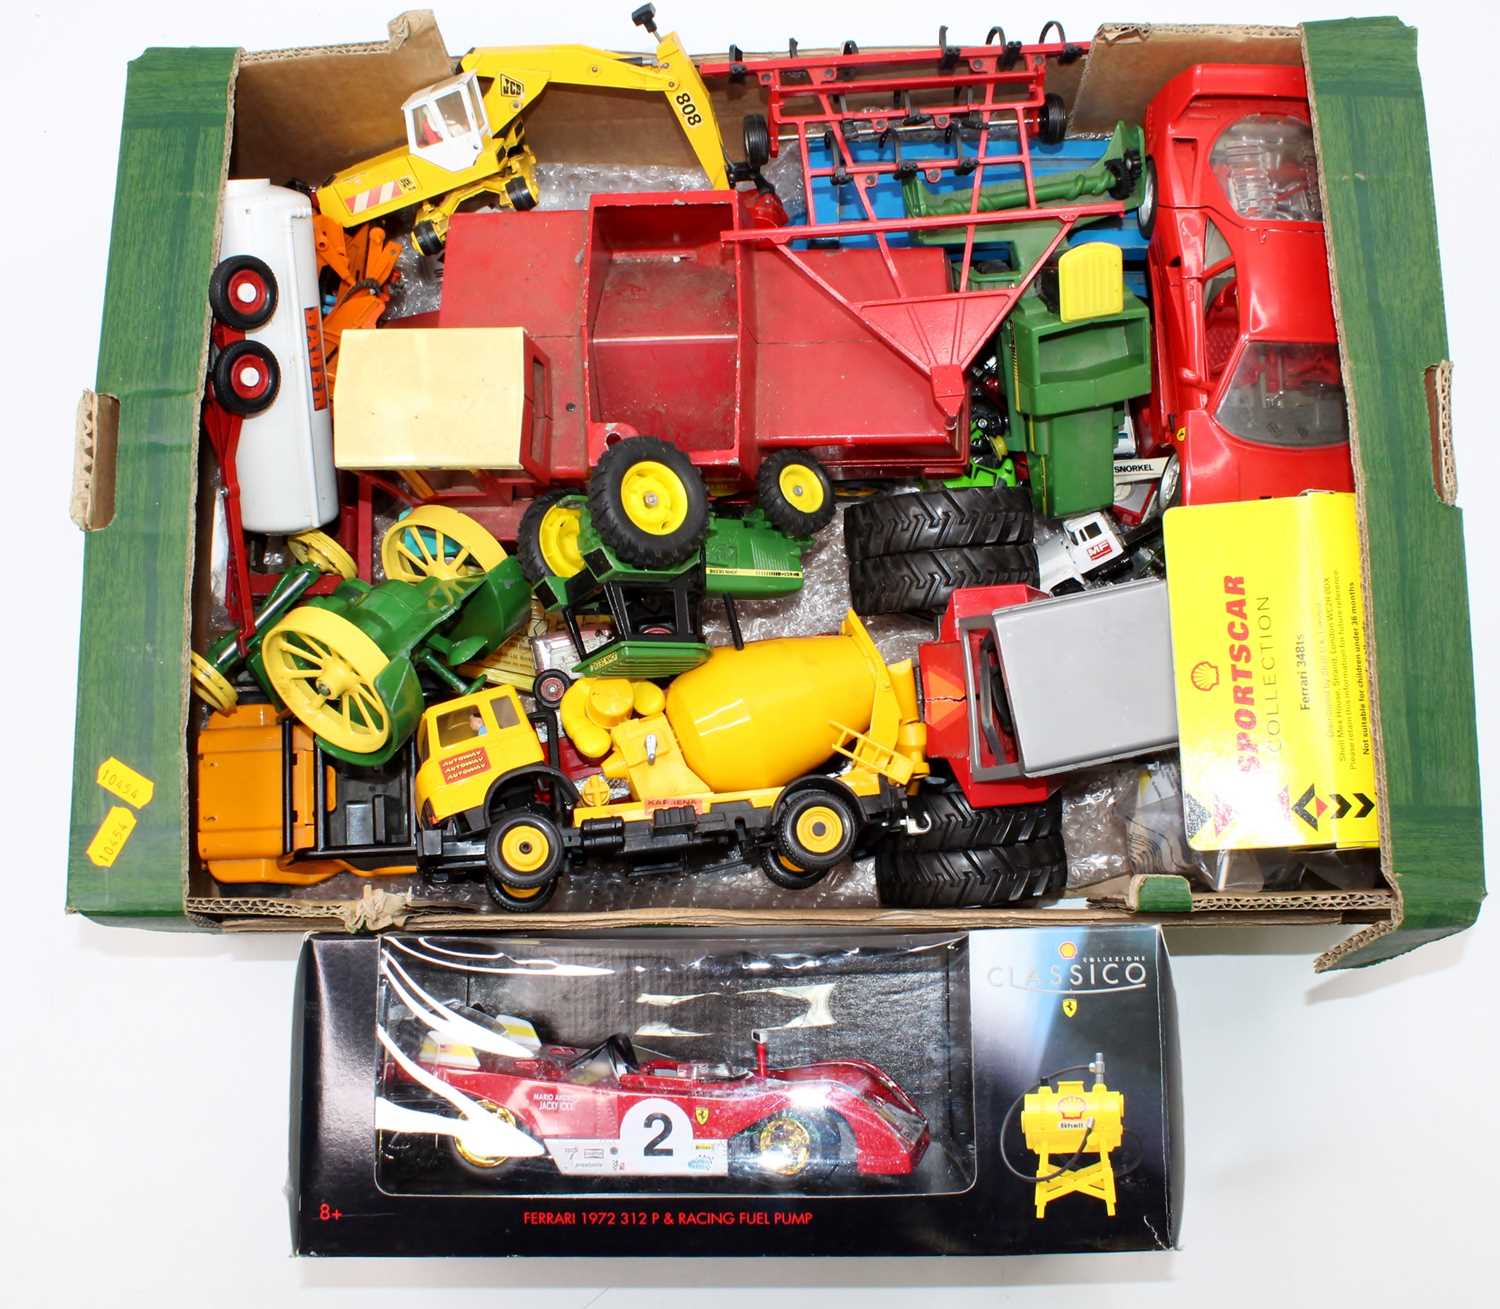 A tray containing a collection of mixed play-worn farming and construction diecast toys including